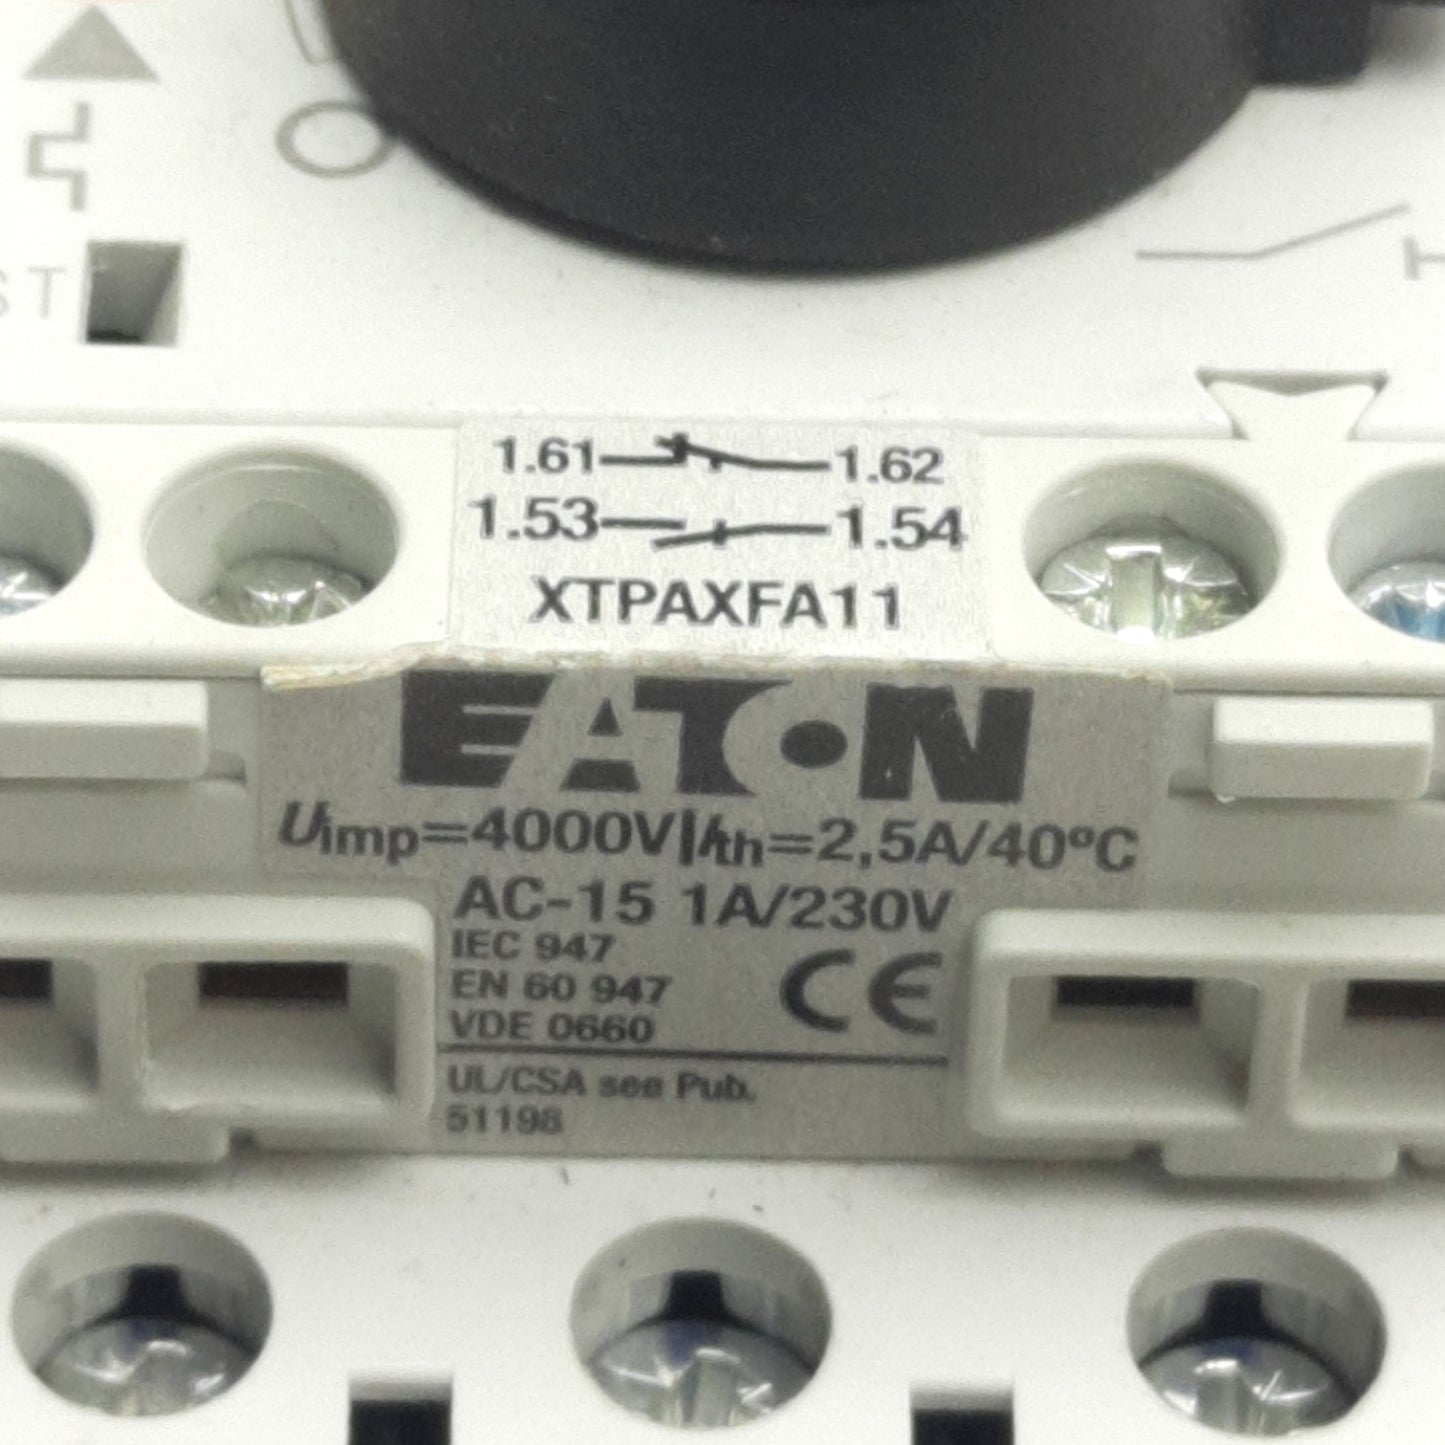 Eaton XTPR004BC1 Manual Motor Controller Starter, With XTPAXFA11, 3HP 600V Max